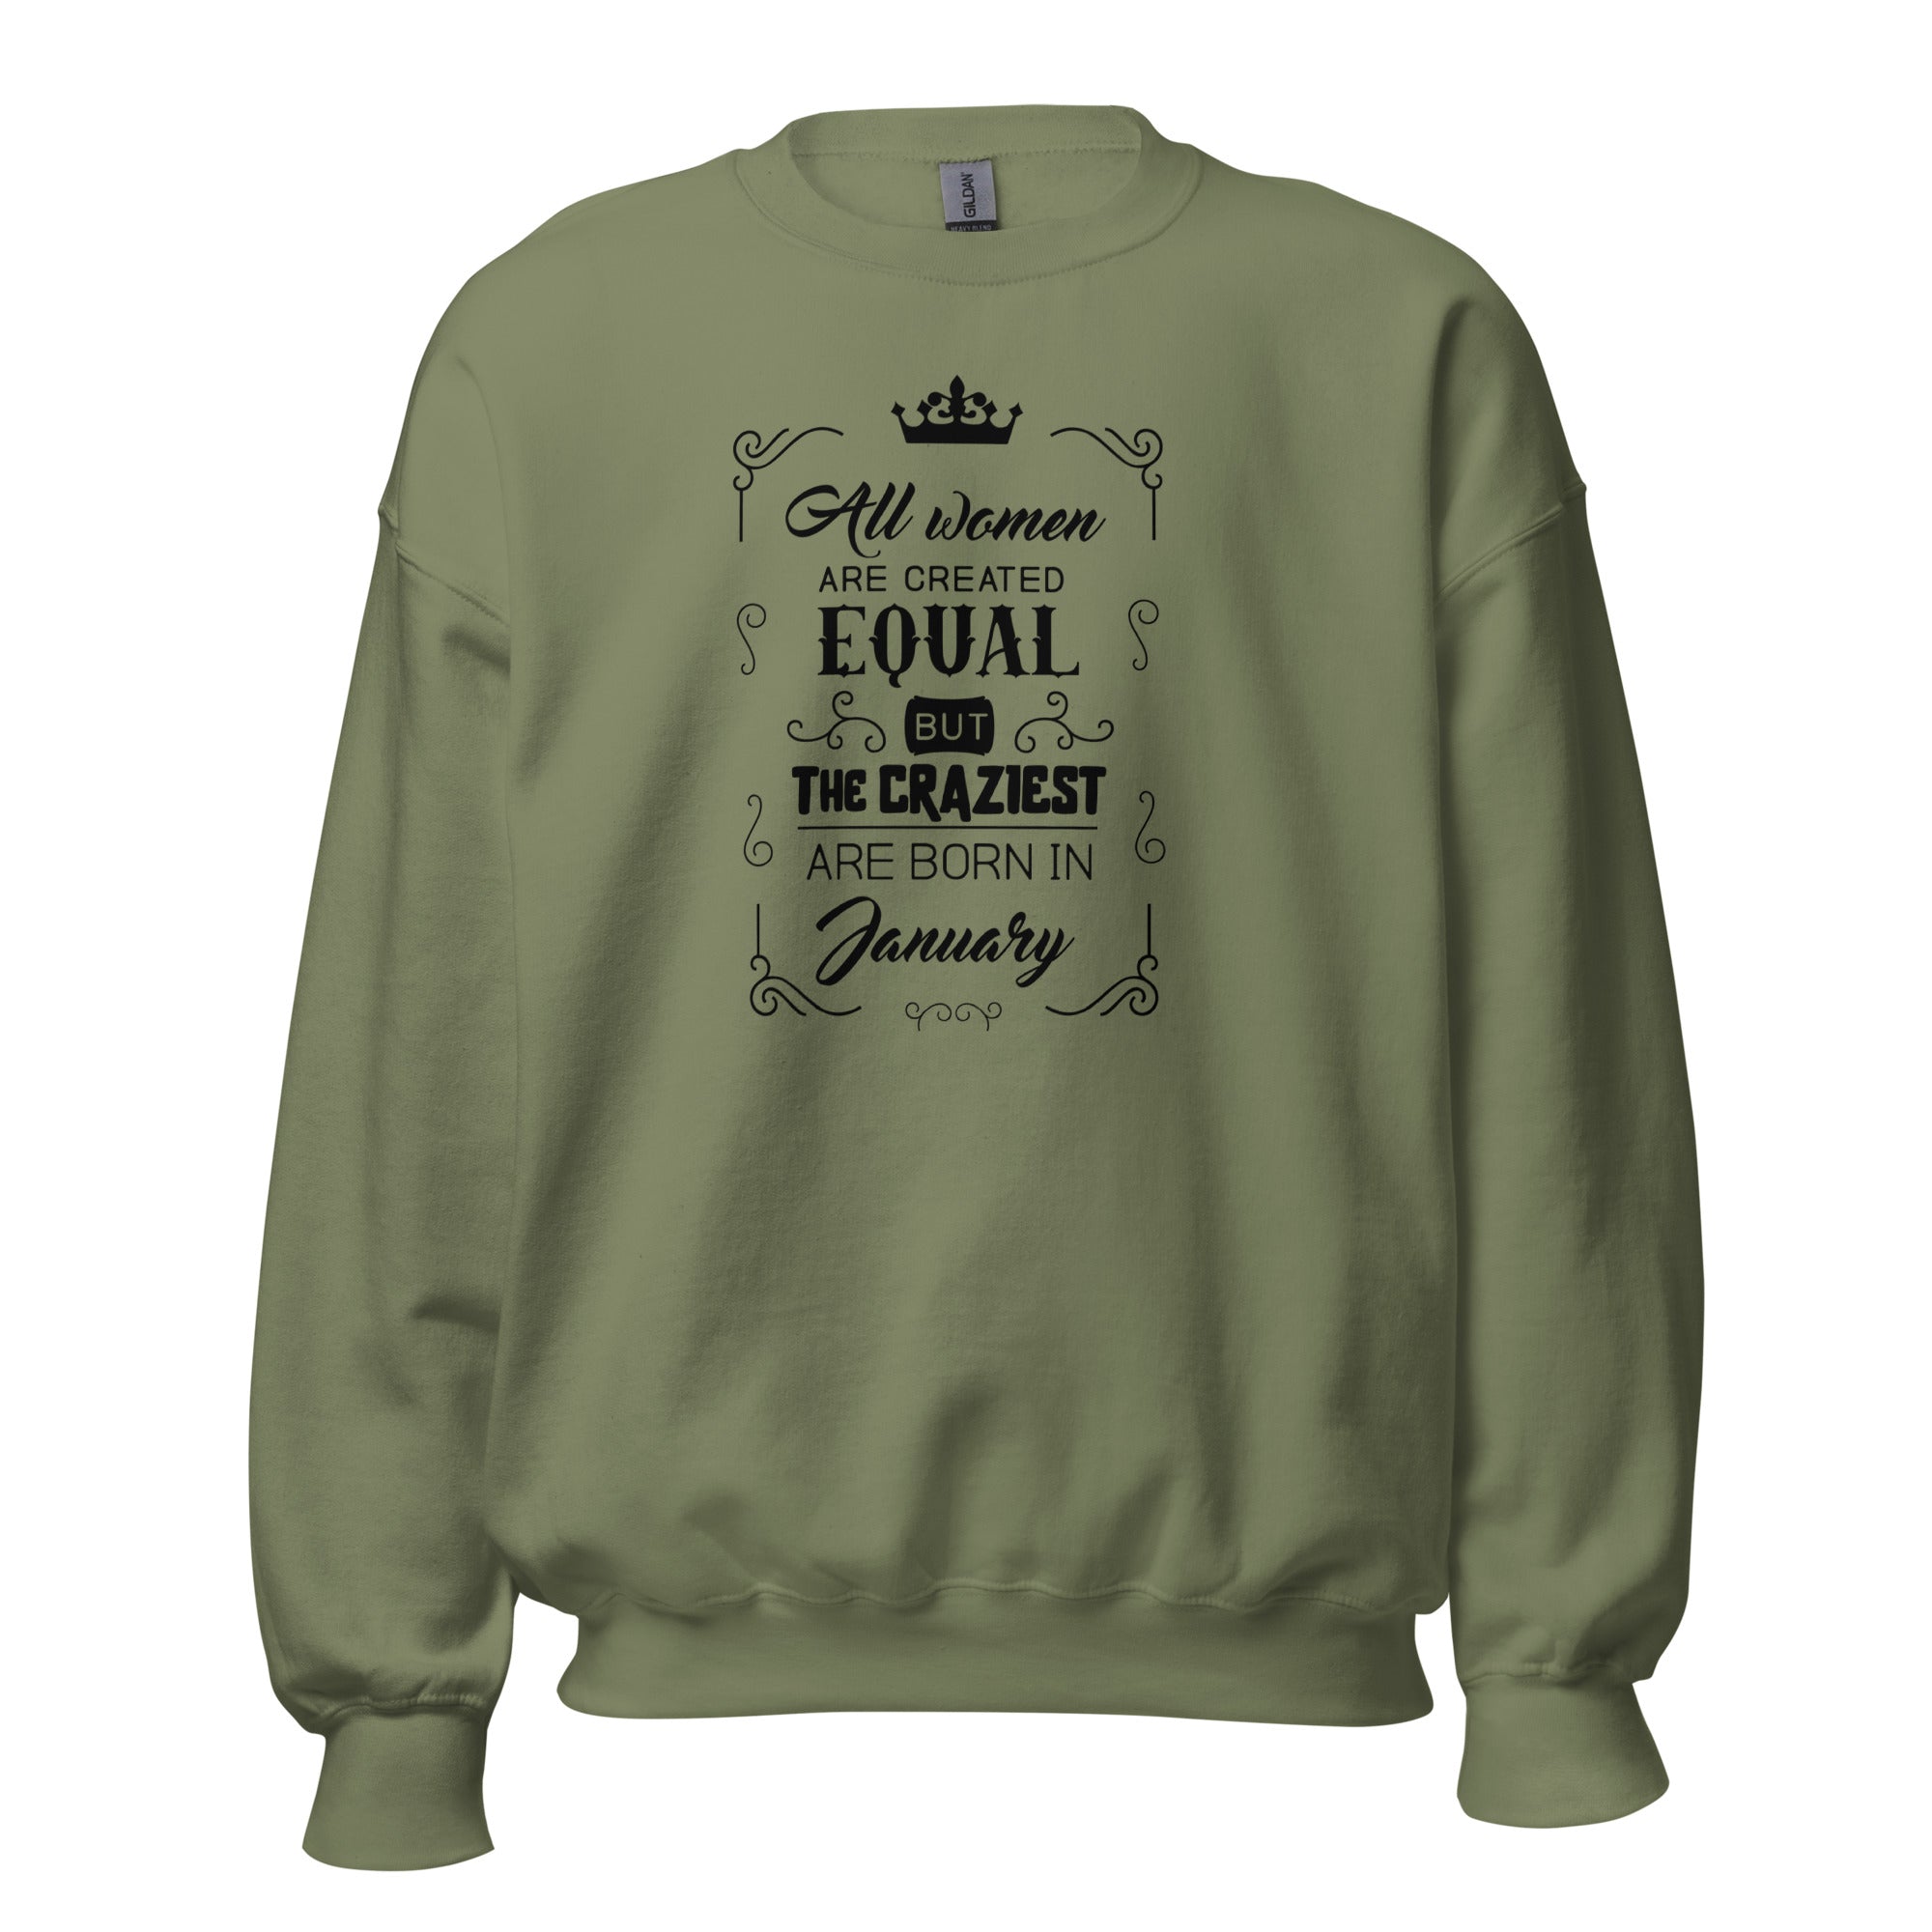 Women's Crew Neck Sweatshirt - All Women Are Created Equal But The Craziest Are Born In January - GRAPHIC T-SHIRTS